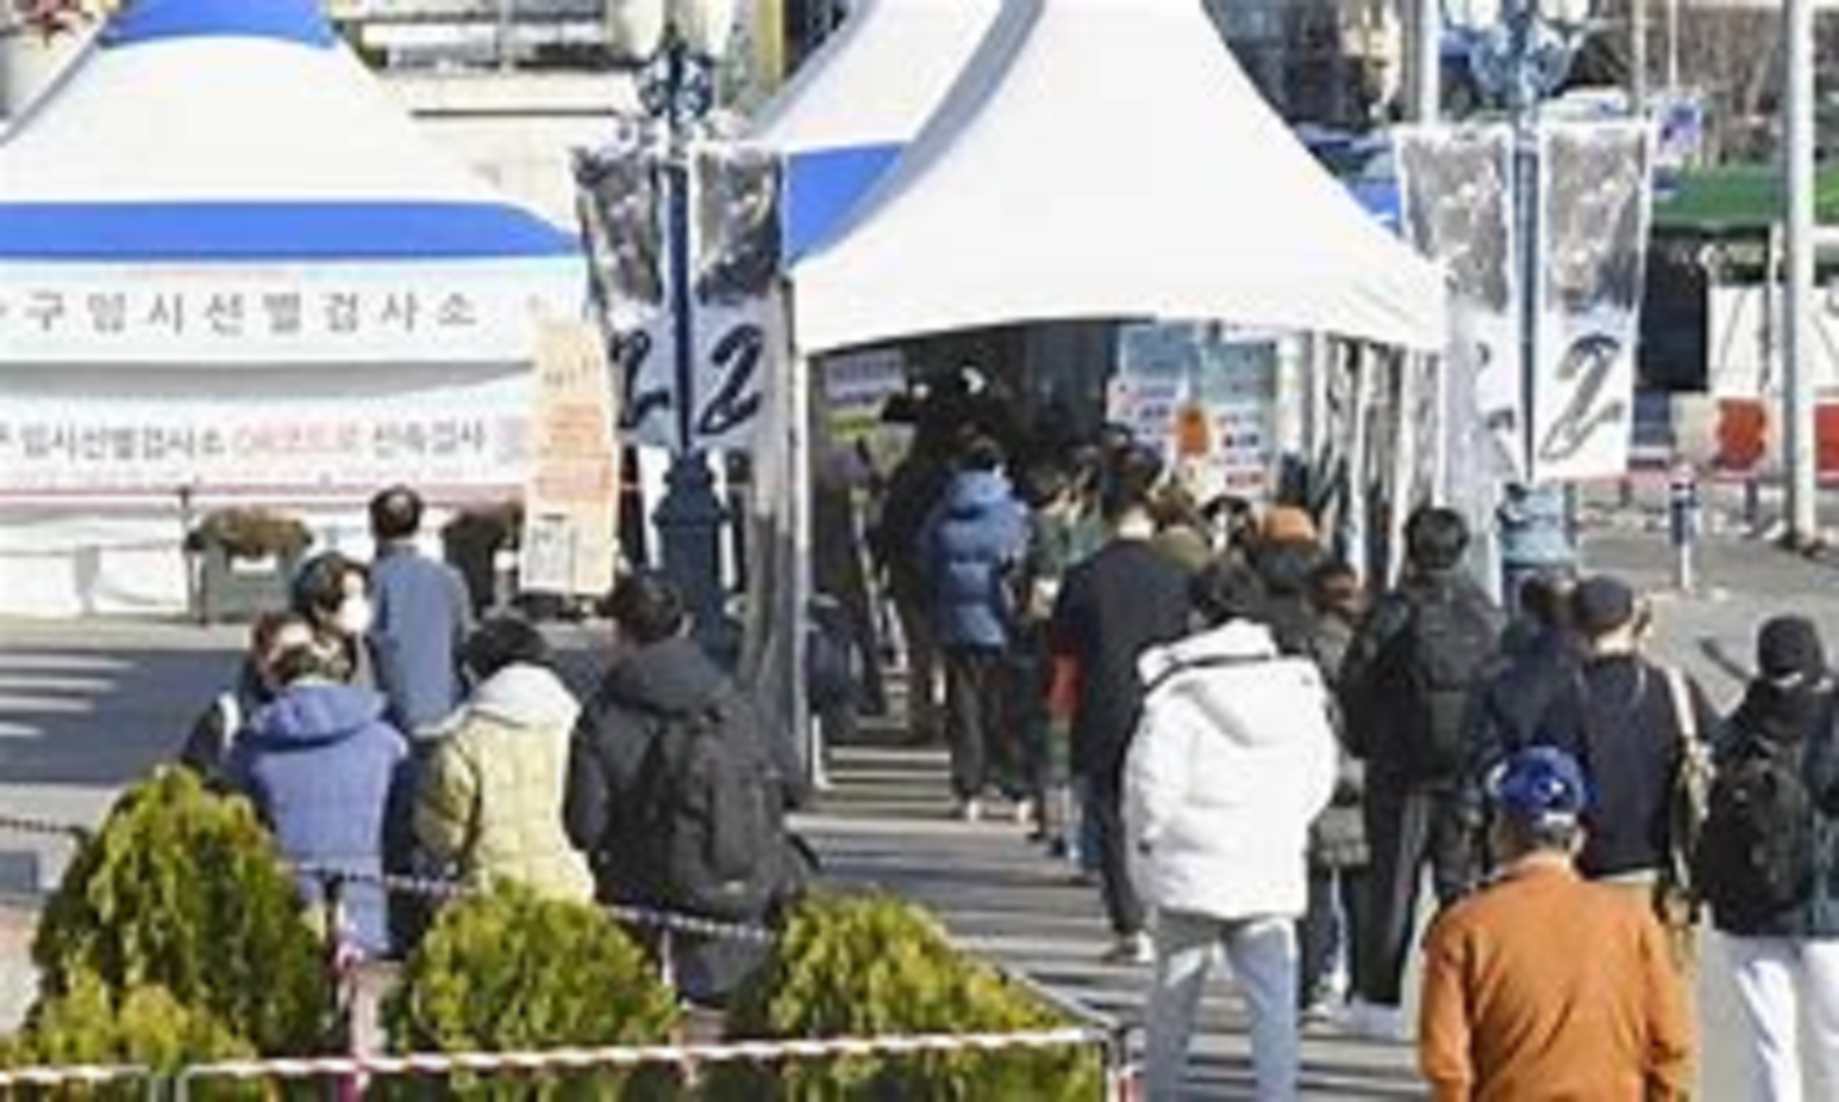 S.Korea’s Daily COVID-19 Cases Hit New Record High At 4,116